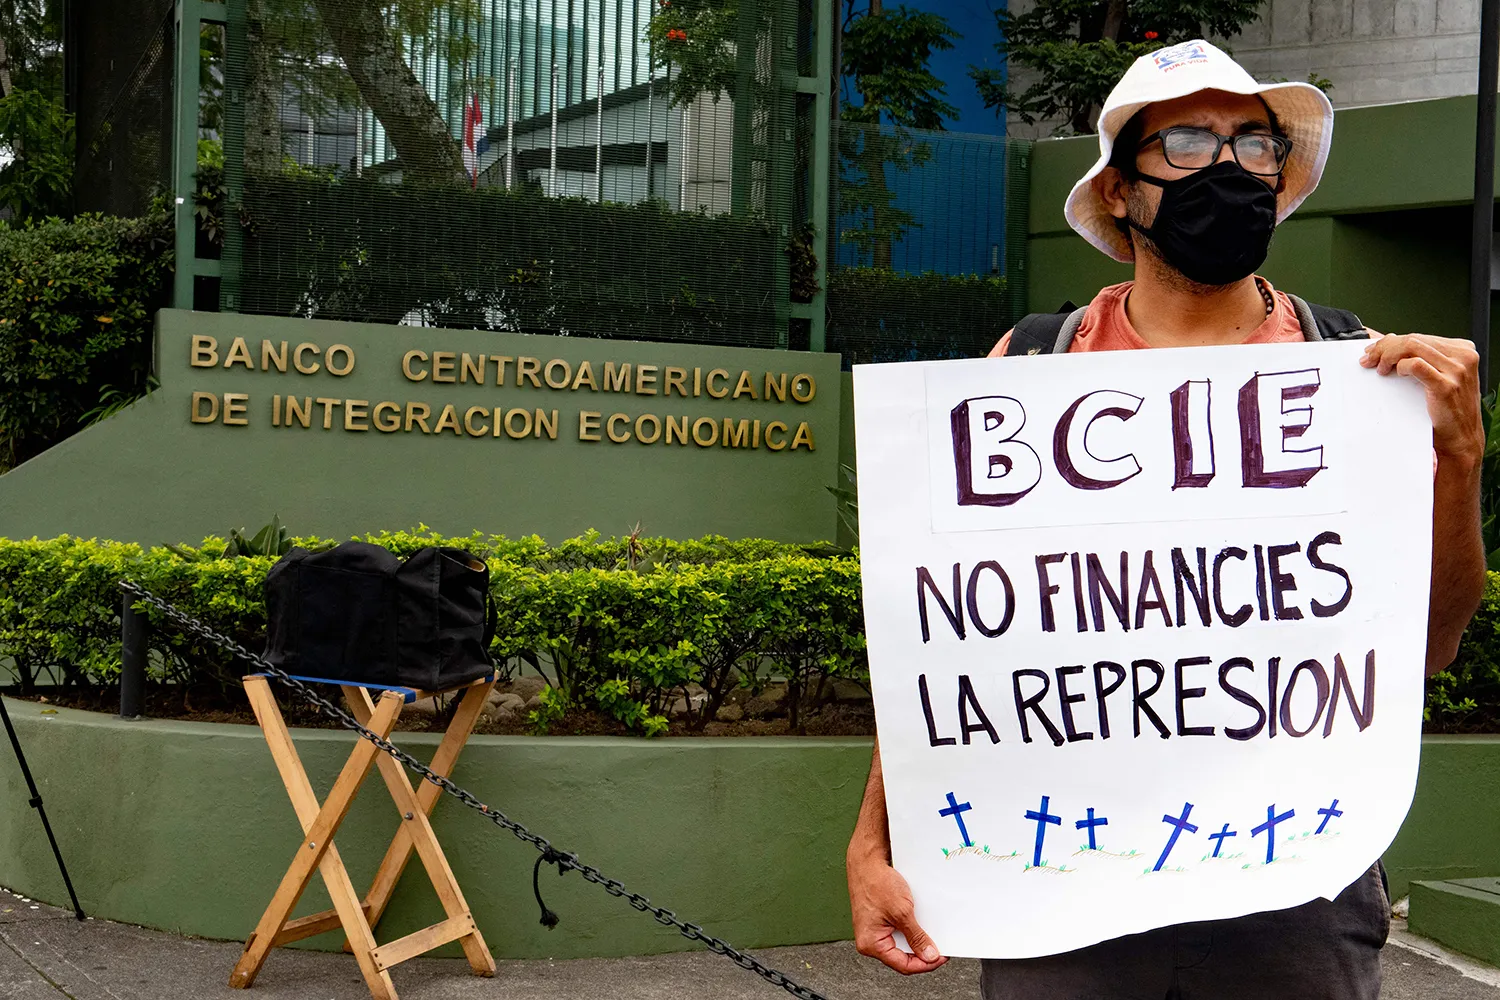 A Nicaraguan citizen exiled in Costa Rica, who wears a bucket hat and a protective face mask, holds a sign that reads: "BCIE: No Financies La Represion" in front of the CABEI bank building during a protest.